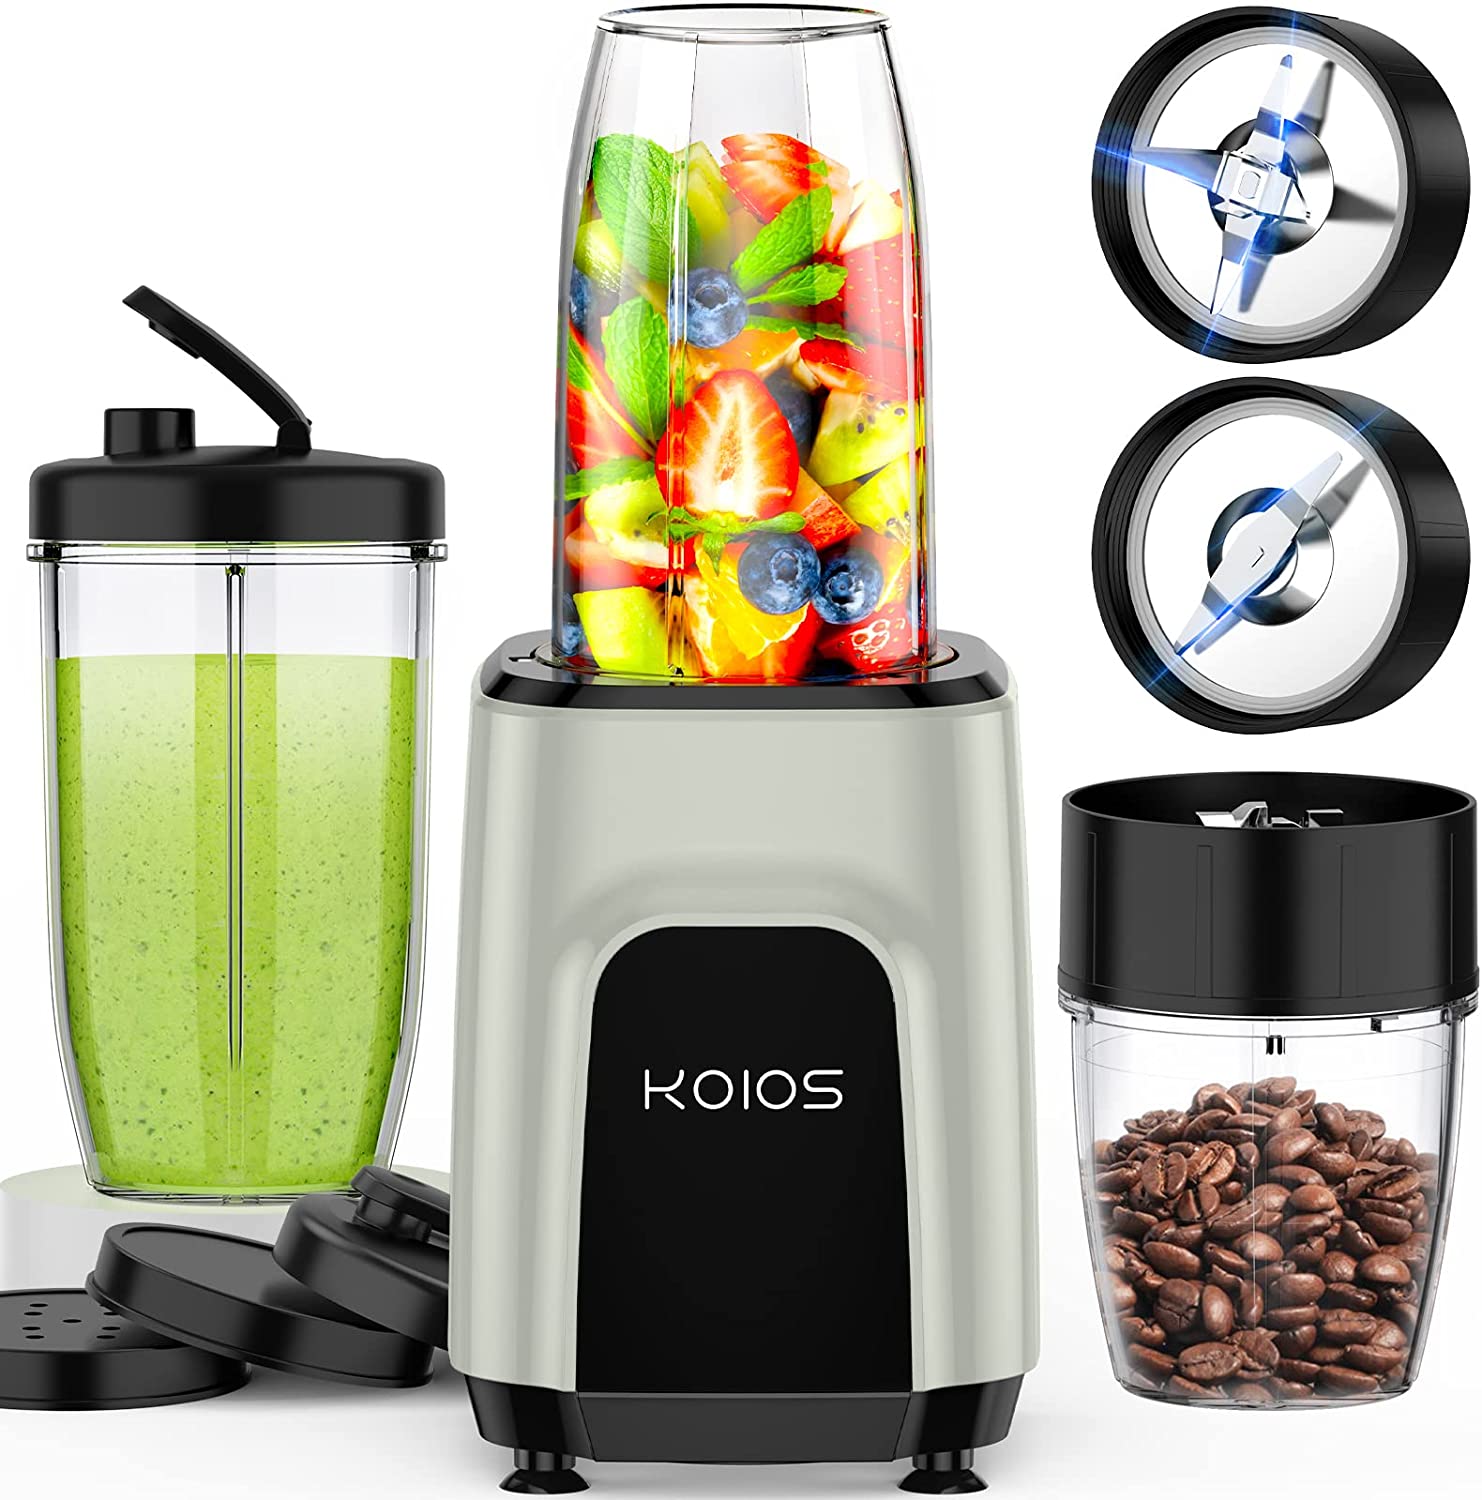 Wholesale protein shake blender to Store, Carry and Keep Water Handy 